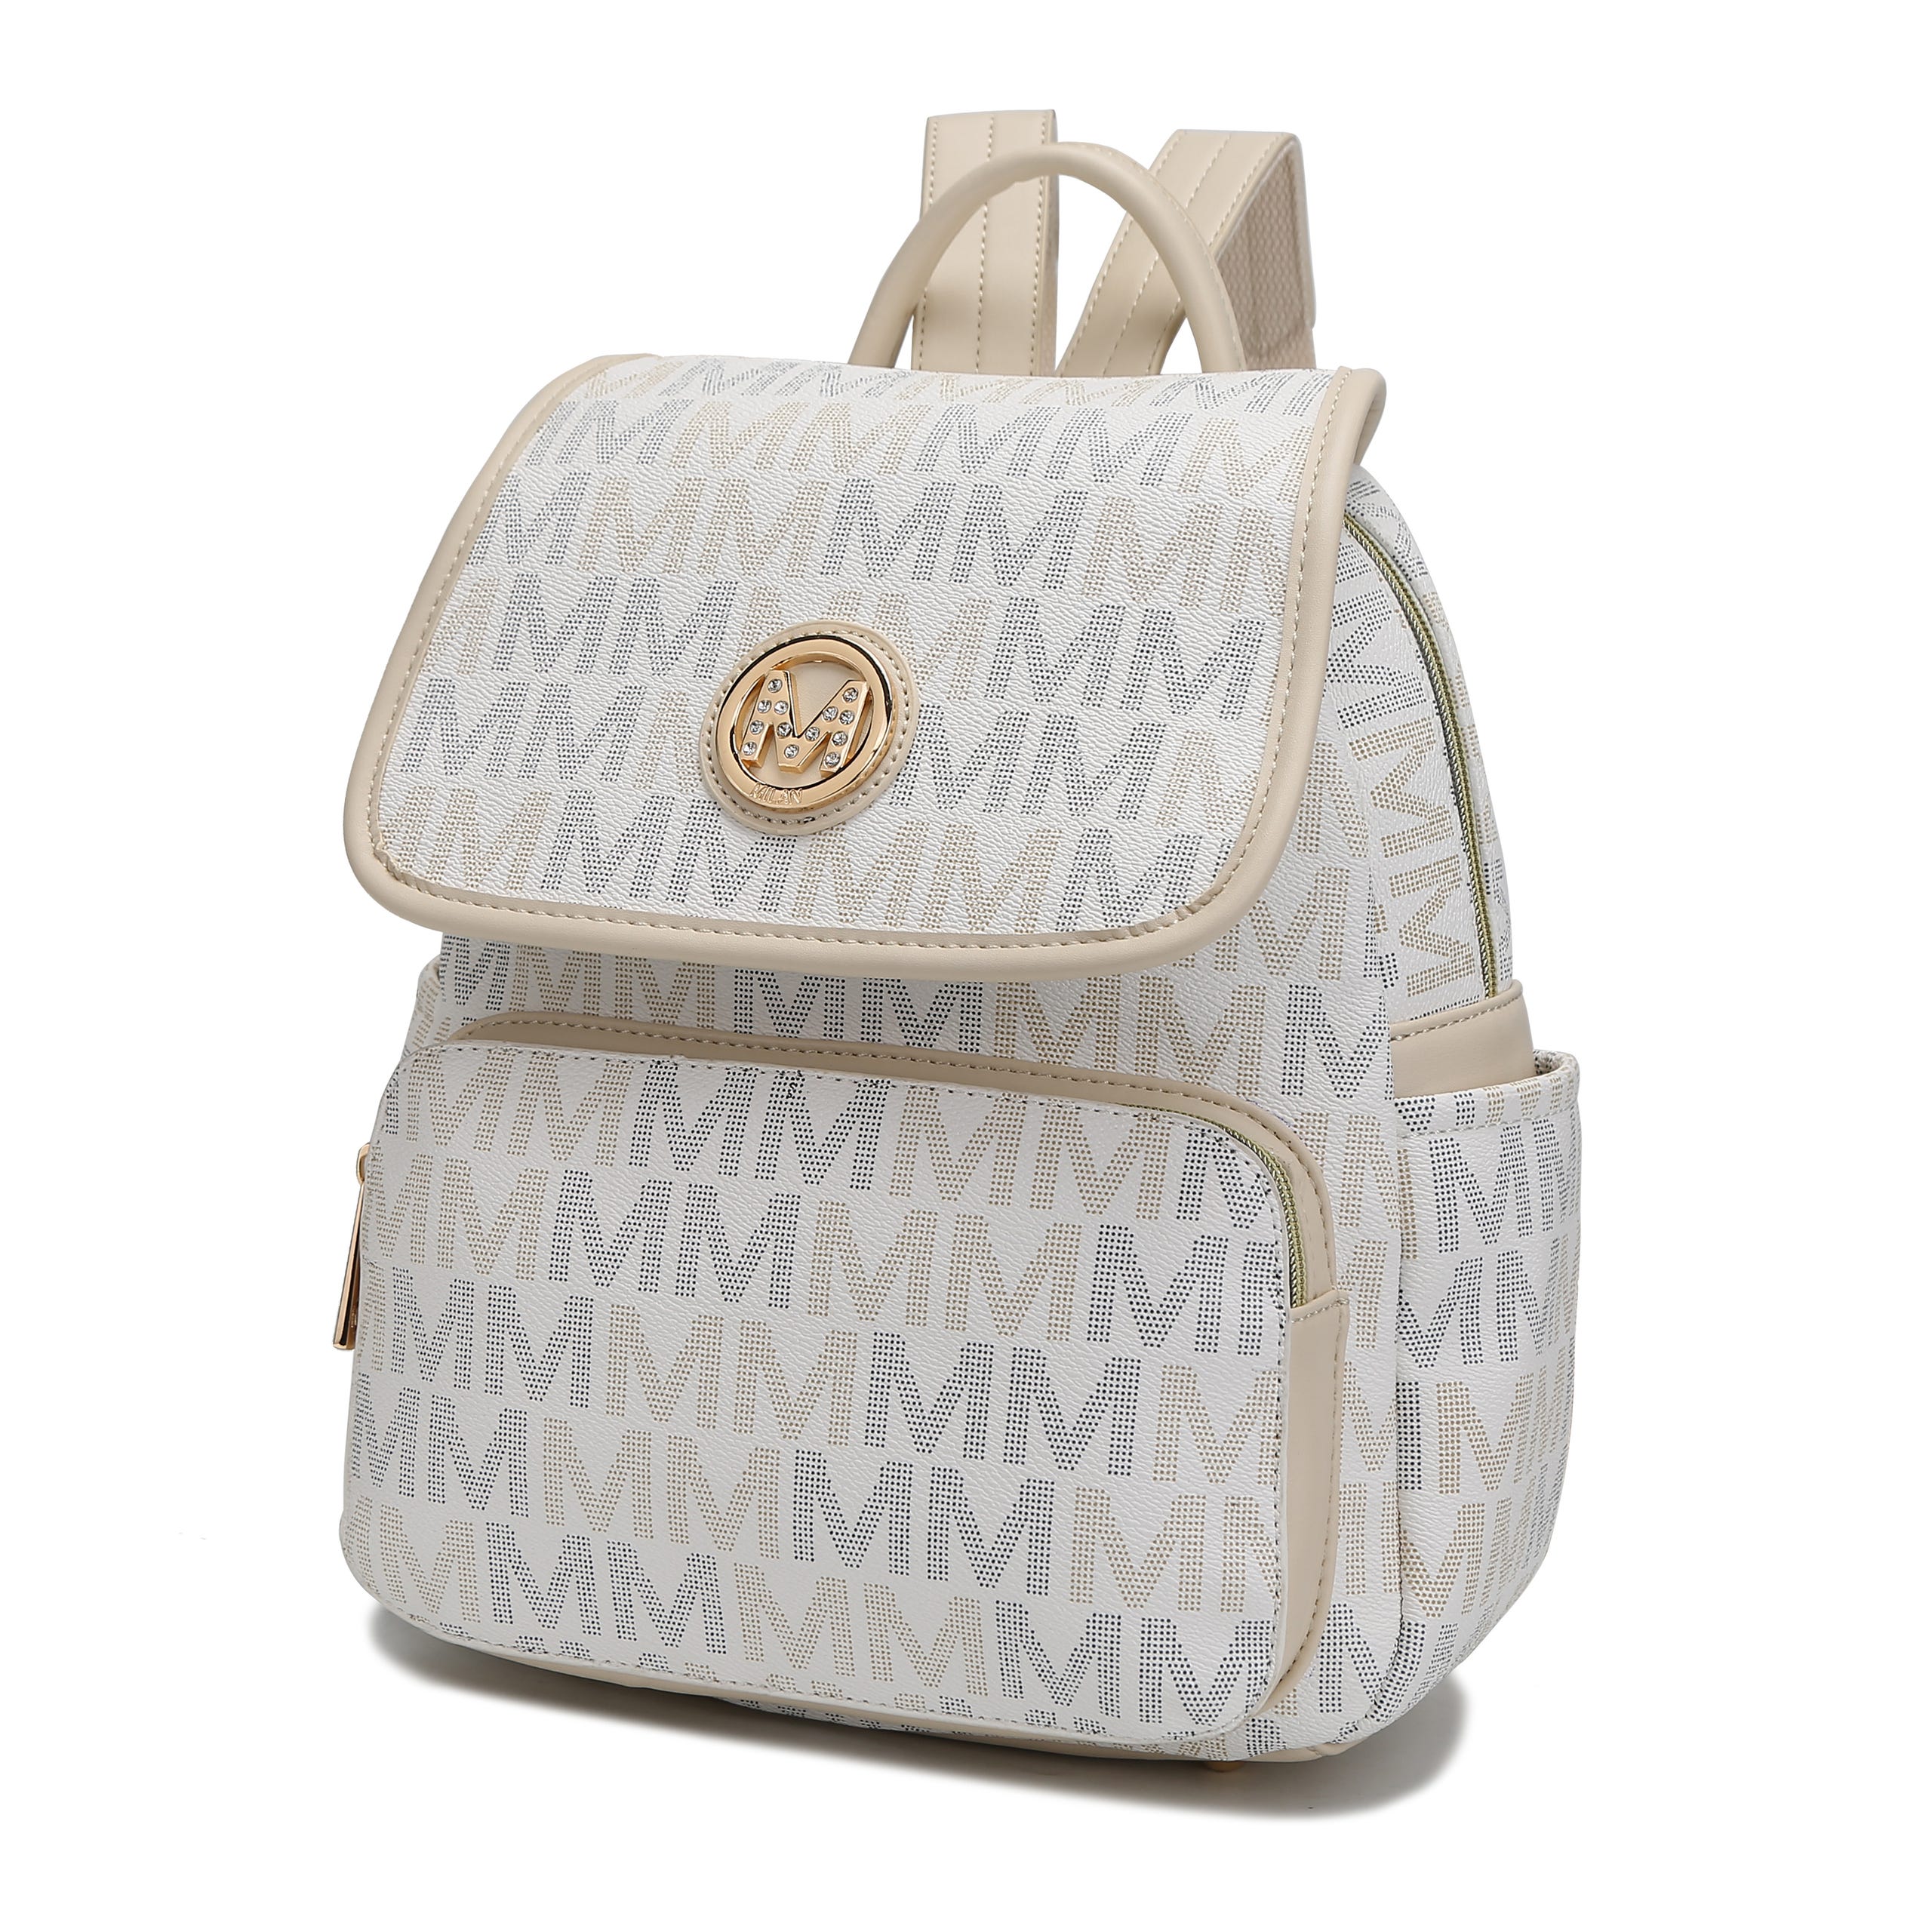 A white and beige patterned backpack with a front flap, gold-tone emblem, and external zippers.